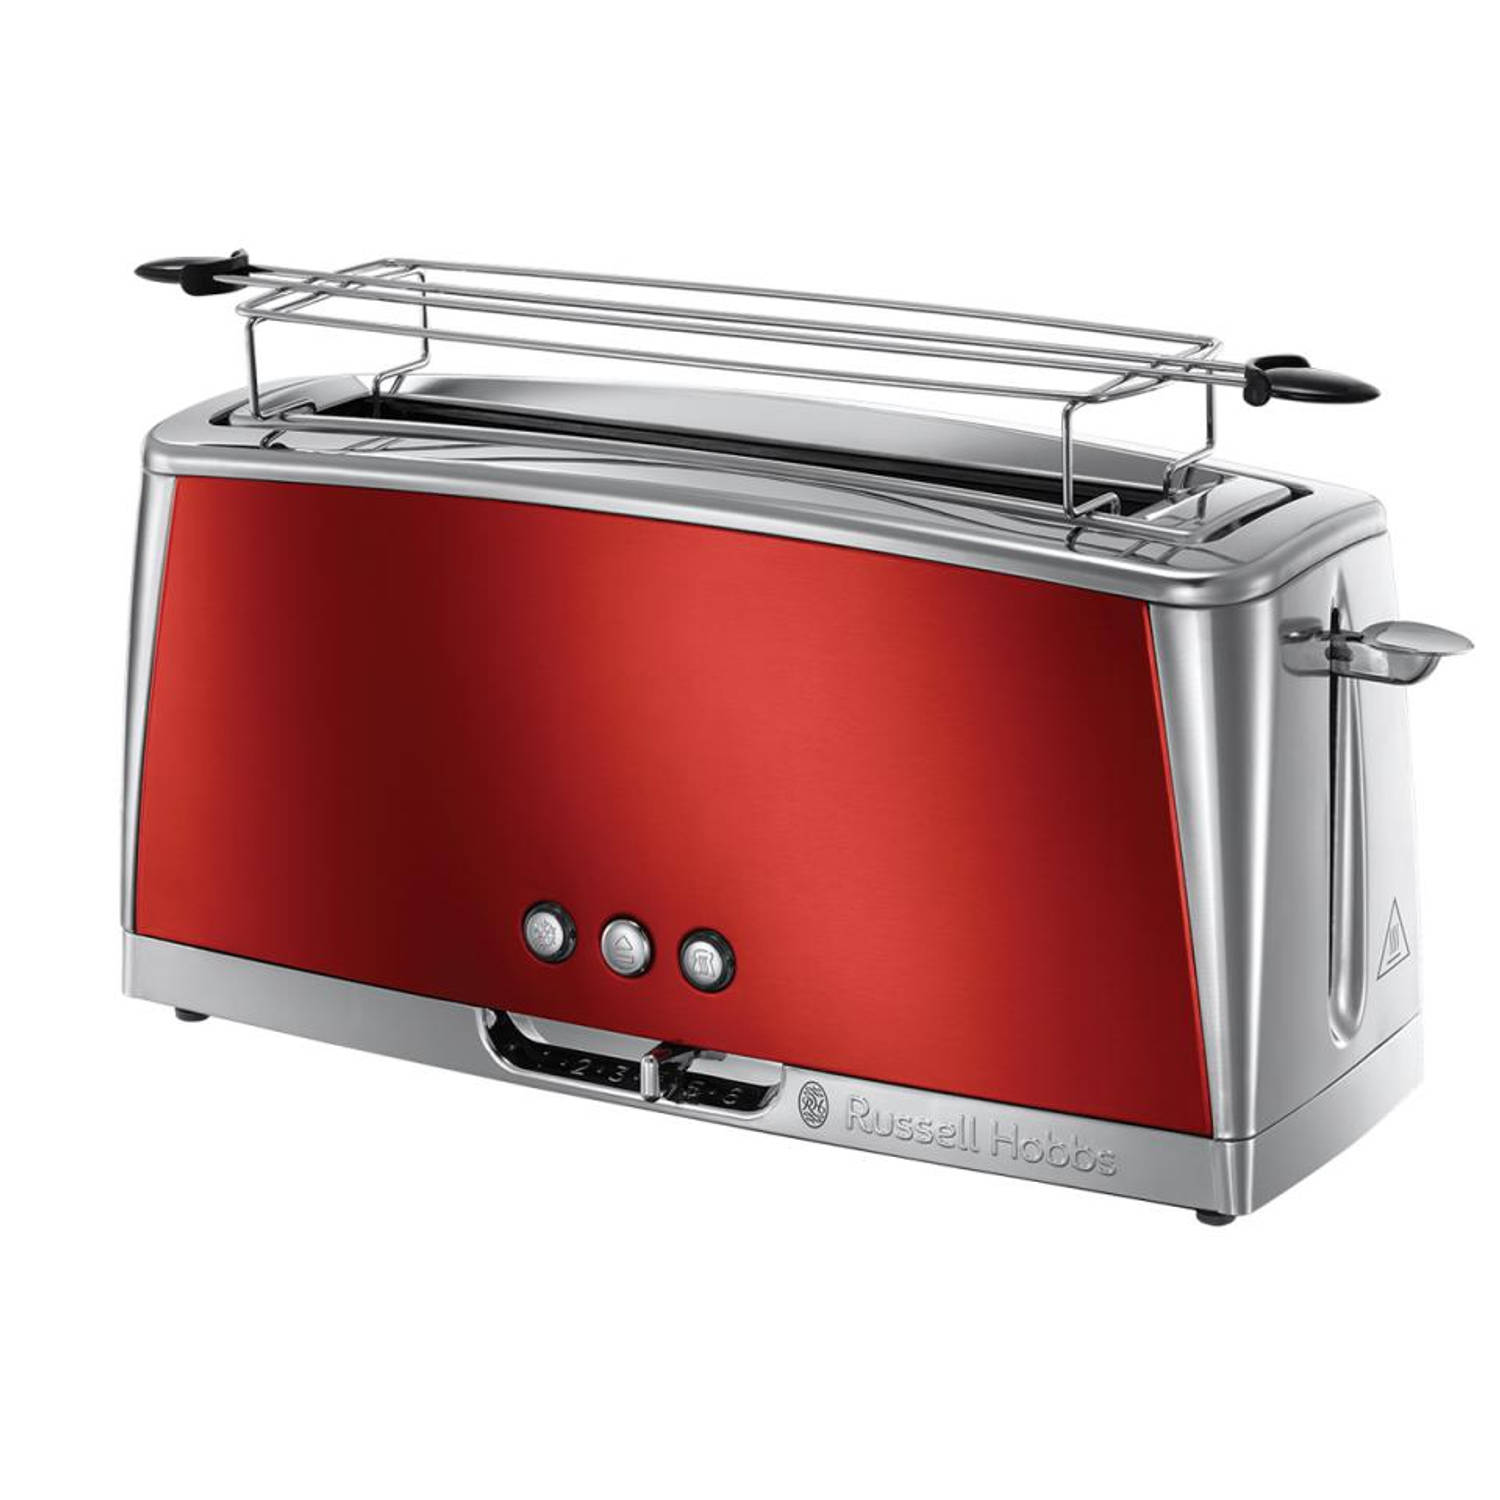 Russell Hobbs broodrooster Luna extra - rood